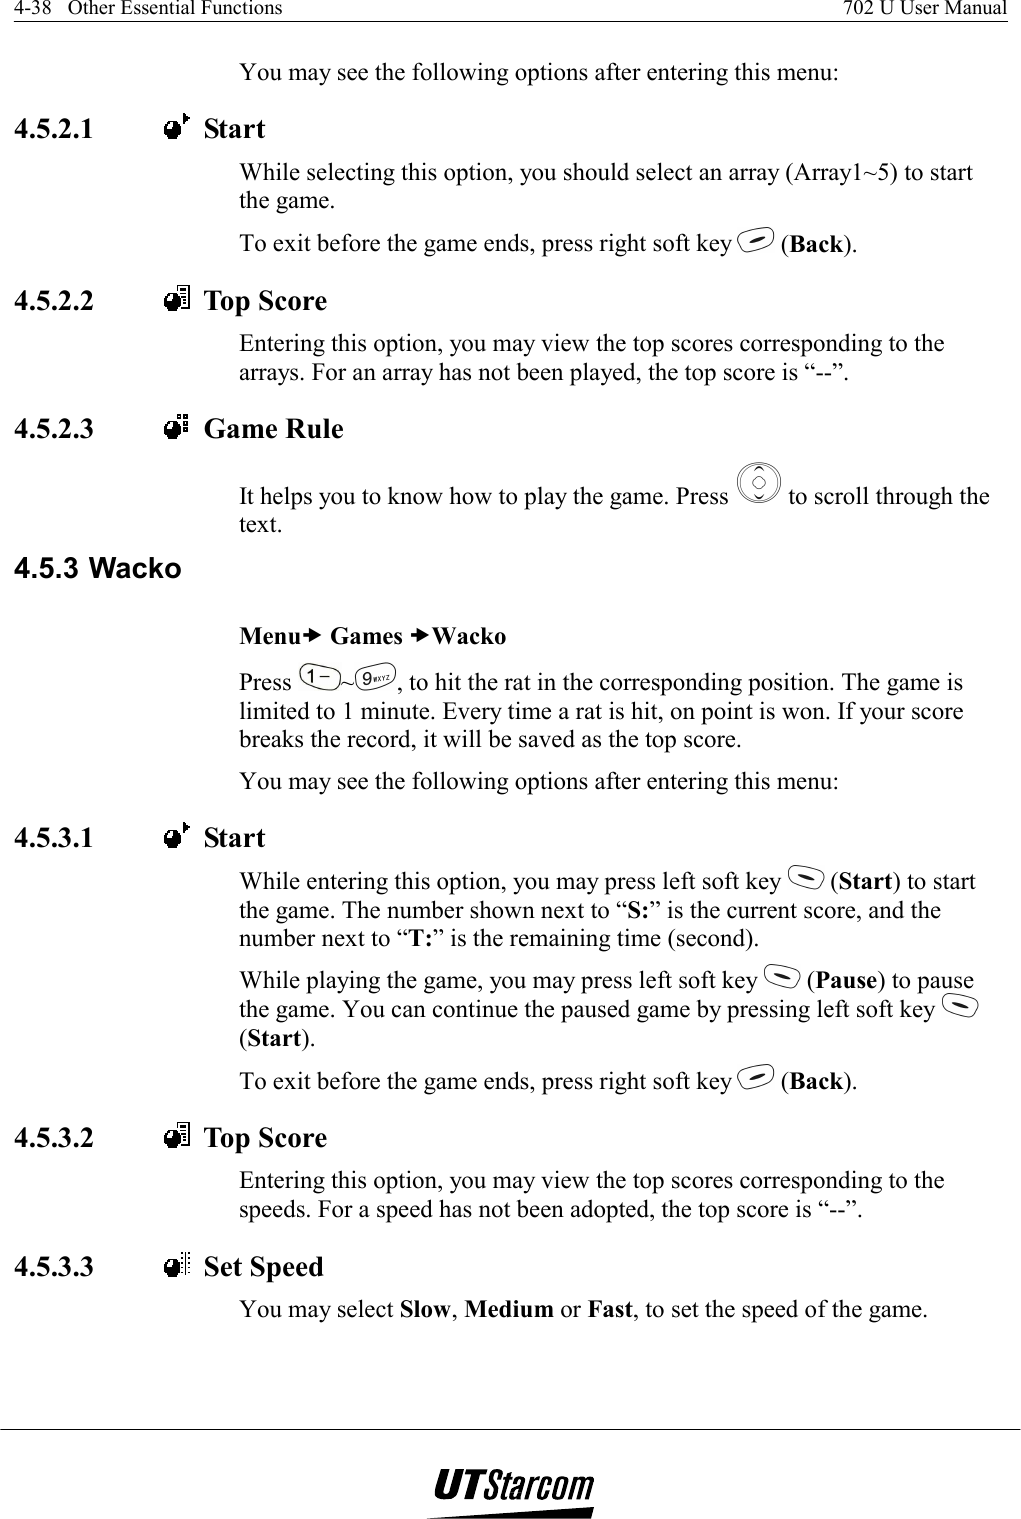 4-38   Other Essential Functions    702 U User Manual   You may see the following options after entering this menu:  4.5.2.1    Start While selecting this option, you should select an array (Array1~5) to start the game. To exit before the game ends, press right soft key   (Back). 4.5.2.2    Top Score Entering this option, you may view the top scores corresponding to the arrays. For an array has not been played, the top score is “--”. 4.5.2.3    Game Rule It helps you to know how to play the game. Press   to scroll through the text. 4.5.3 Wacko Menux Games xWacko Press  ~, to hit the rat in the corresponding position. The game is limited to 1 minute. Every time a rat is hit, on point is won. If your score breaks the record, it will be saved as the top score. You may see the following options after entering this menu:  4.5.3.1    Start While entering this option, you may press left soft key   (Start) to start the game. The number shown next to “S:” is the current score, and the number next to “T:” is the remaining time (second). While playing the game, you may press left soft key   (Pause) to pause the game. You can continue the paused game by pressing left soft key   (Start). To exit before the game ends, press right soft key   (Back). 4.5.3.2    Top Score Entering this option, you may view the top scores corresponding to the speeds. For a speed has not been adopted, the top score is “--”. 4.5.3.3    Set Speed You may select Slow, Medium or Fast, to set the speed of the game. 